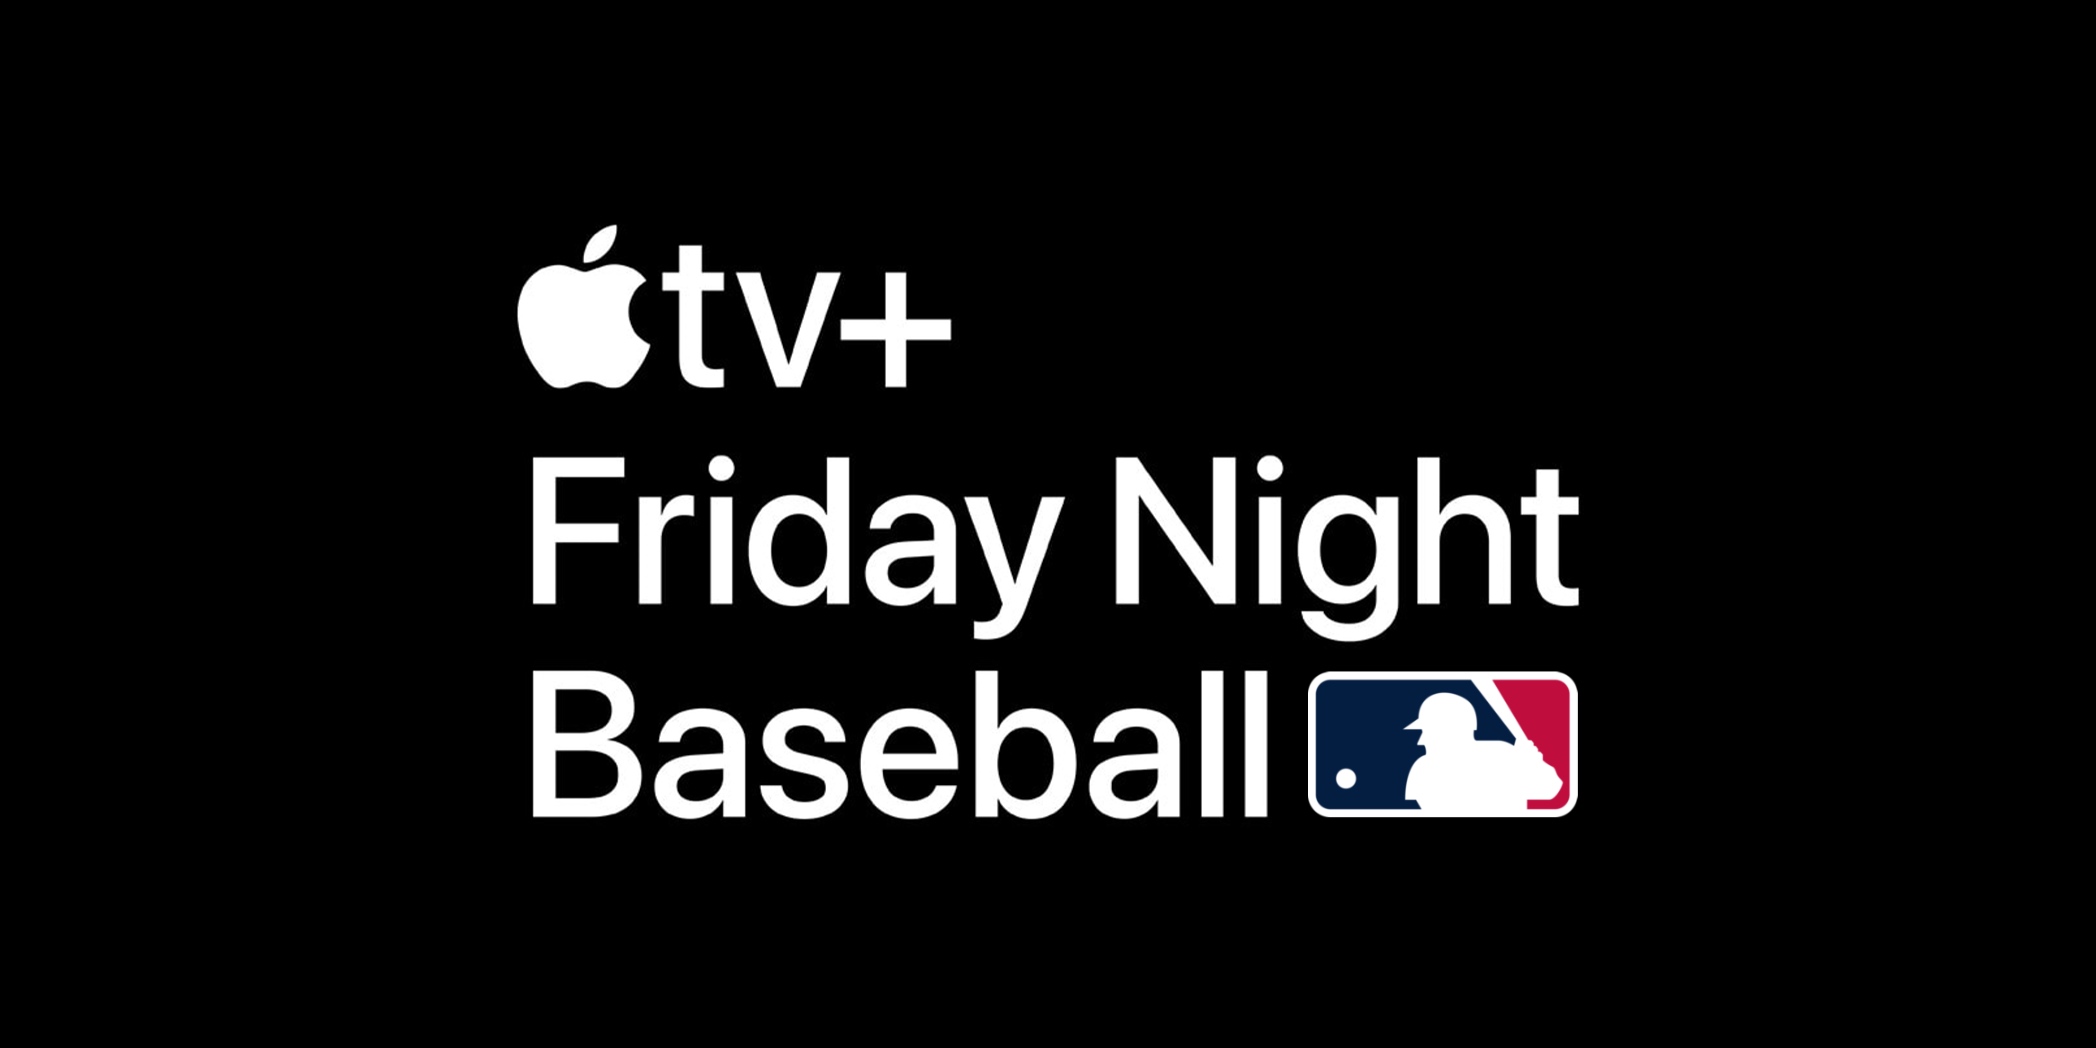 How to watch MLB Friday Night Baseball games on Apple TV+